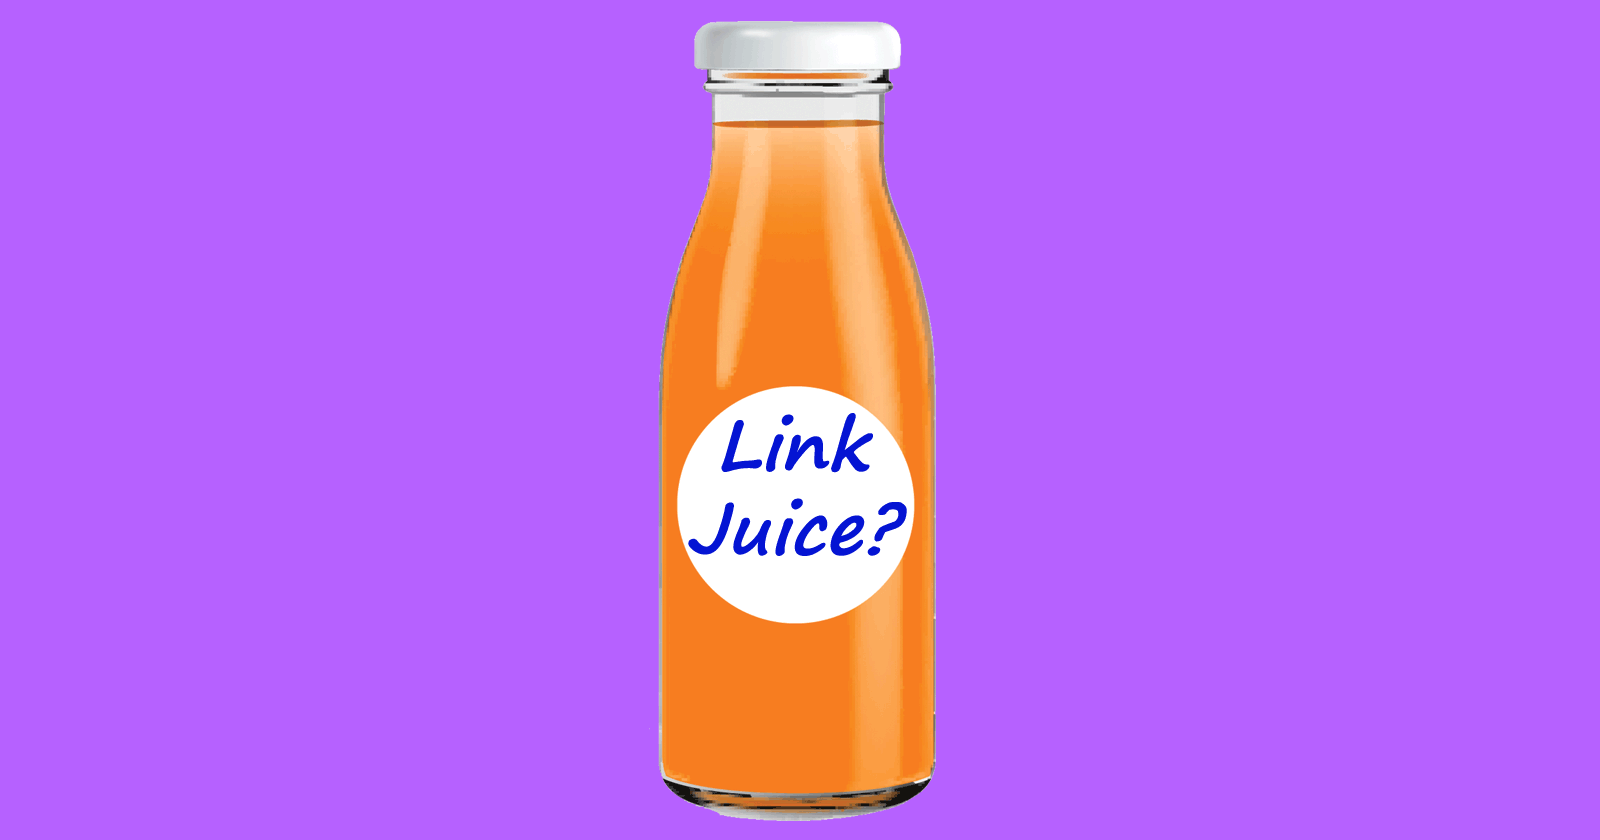 image of a juice bottle with a label that reads, "Link Juice?"